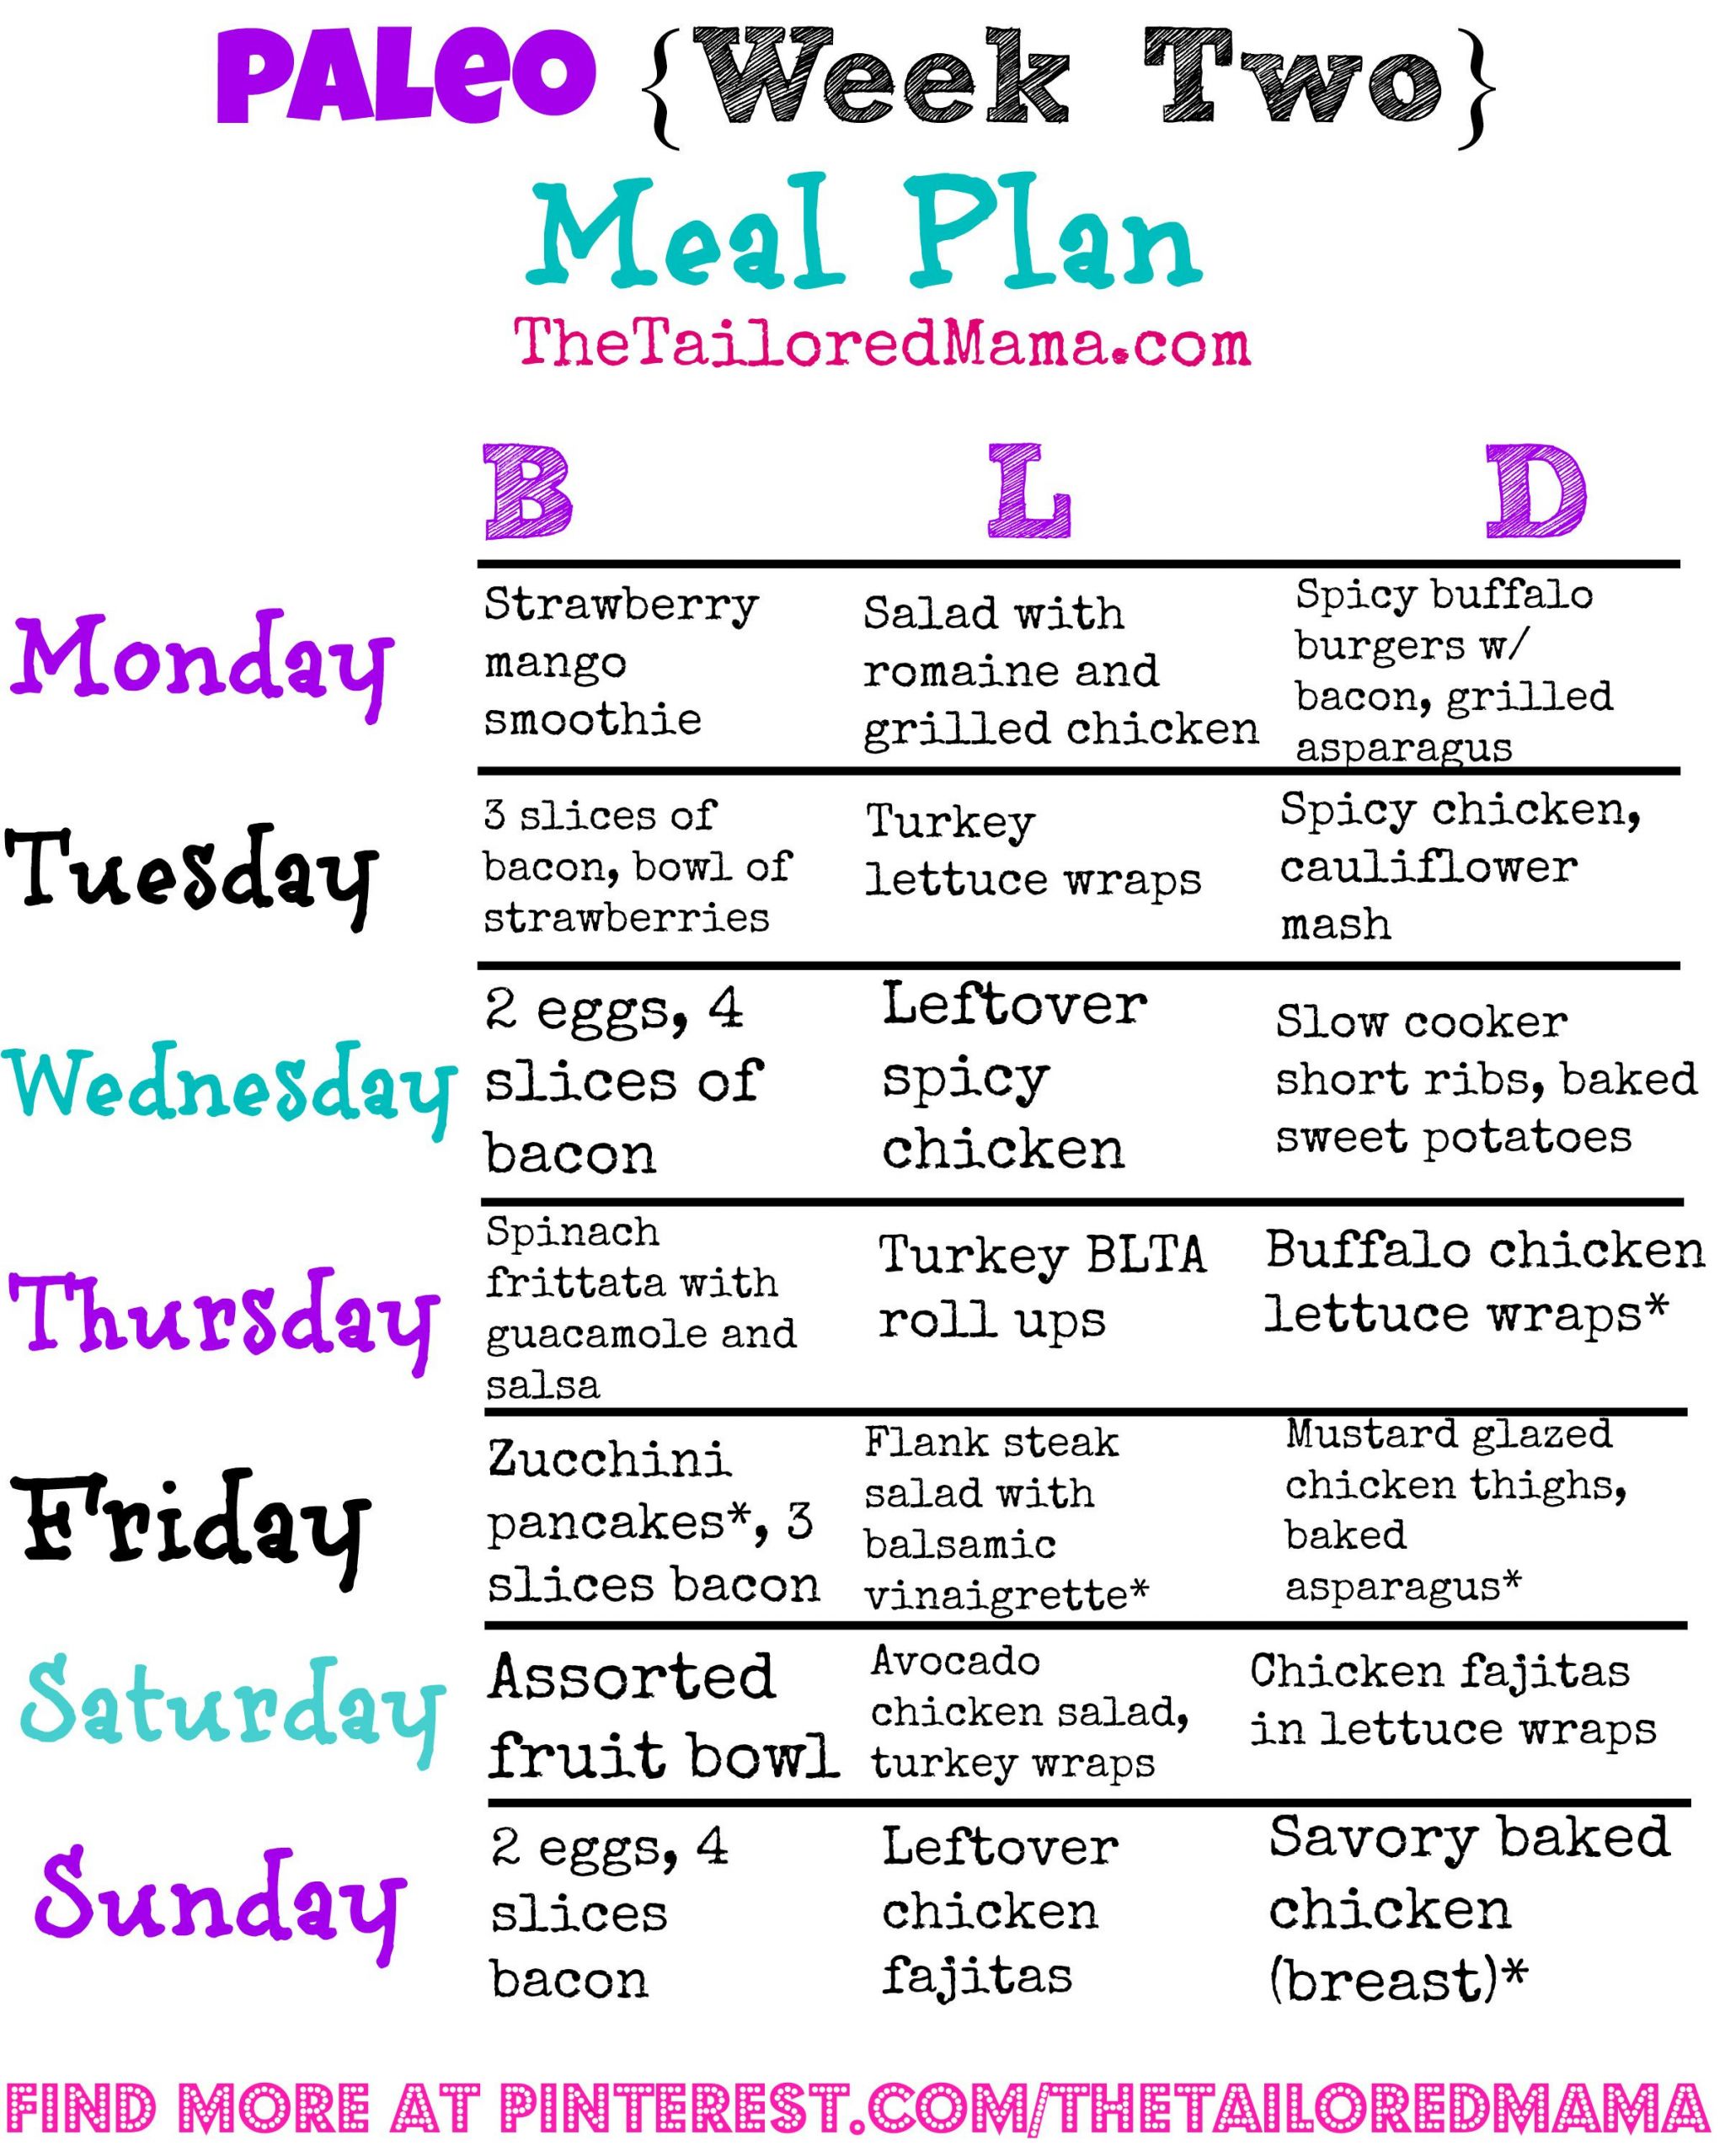 Paleo Diet Meal Plan For Weight Loss Pdf
 Paleo Week Two Meal Plan